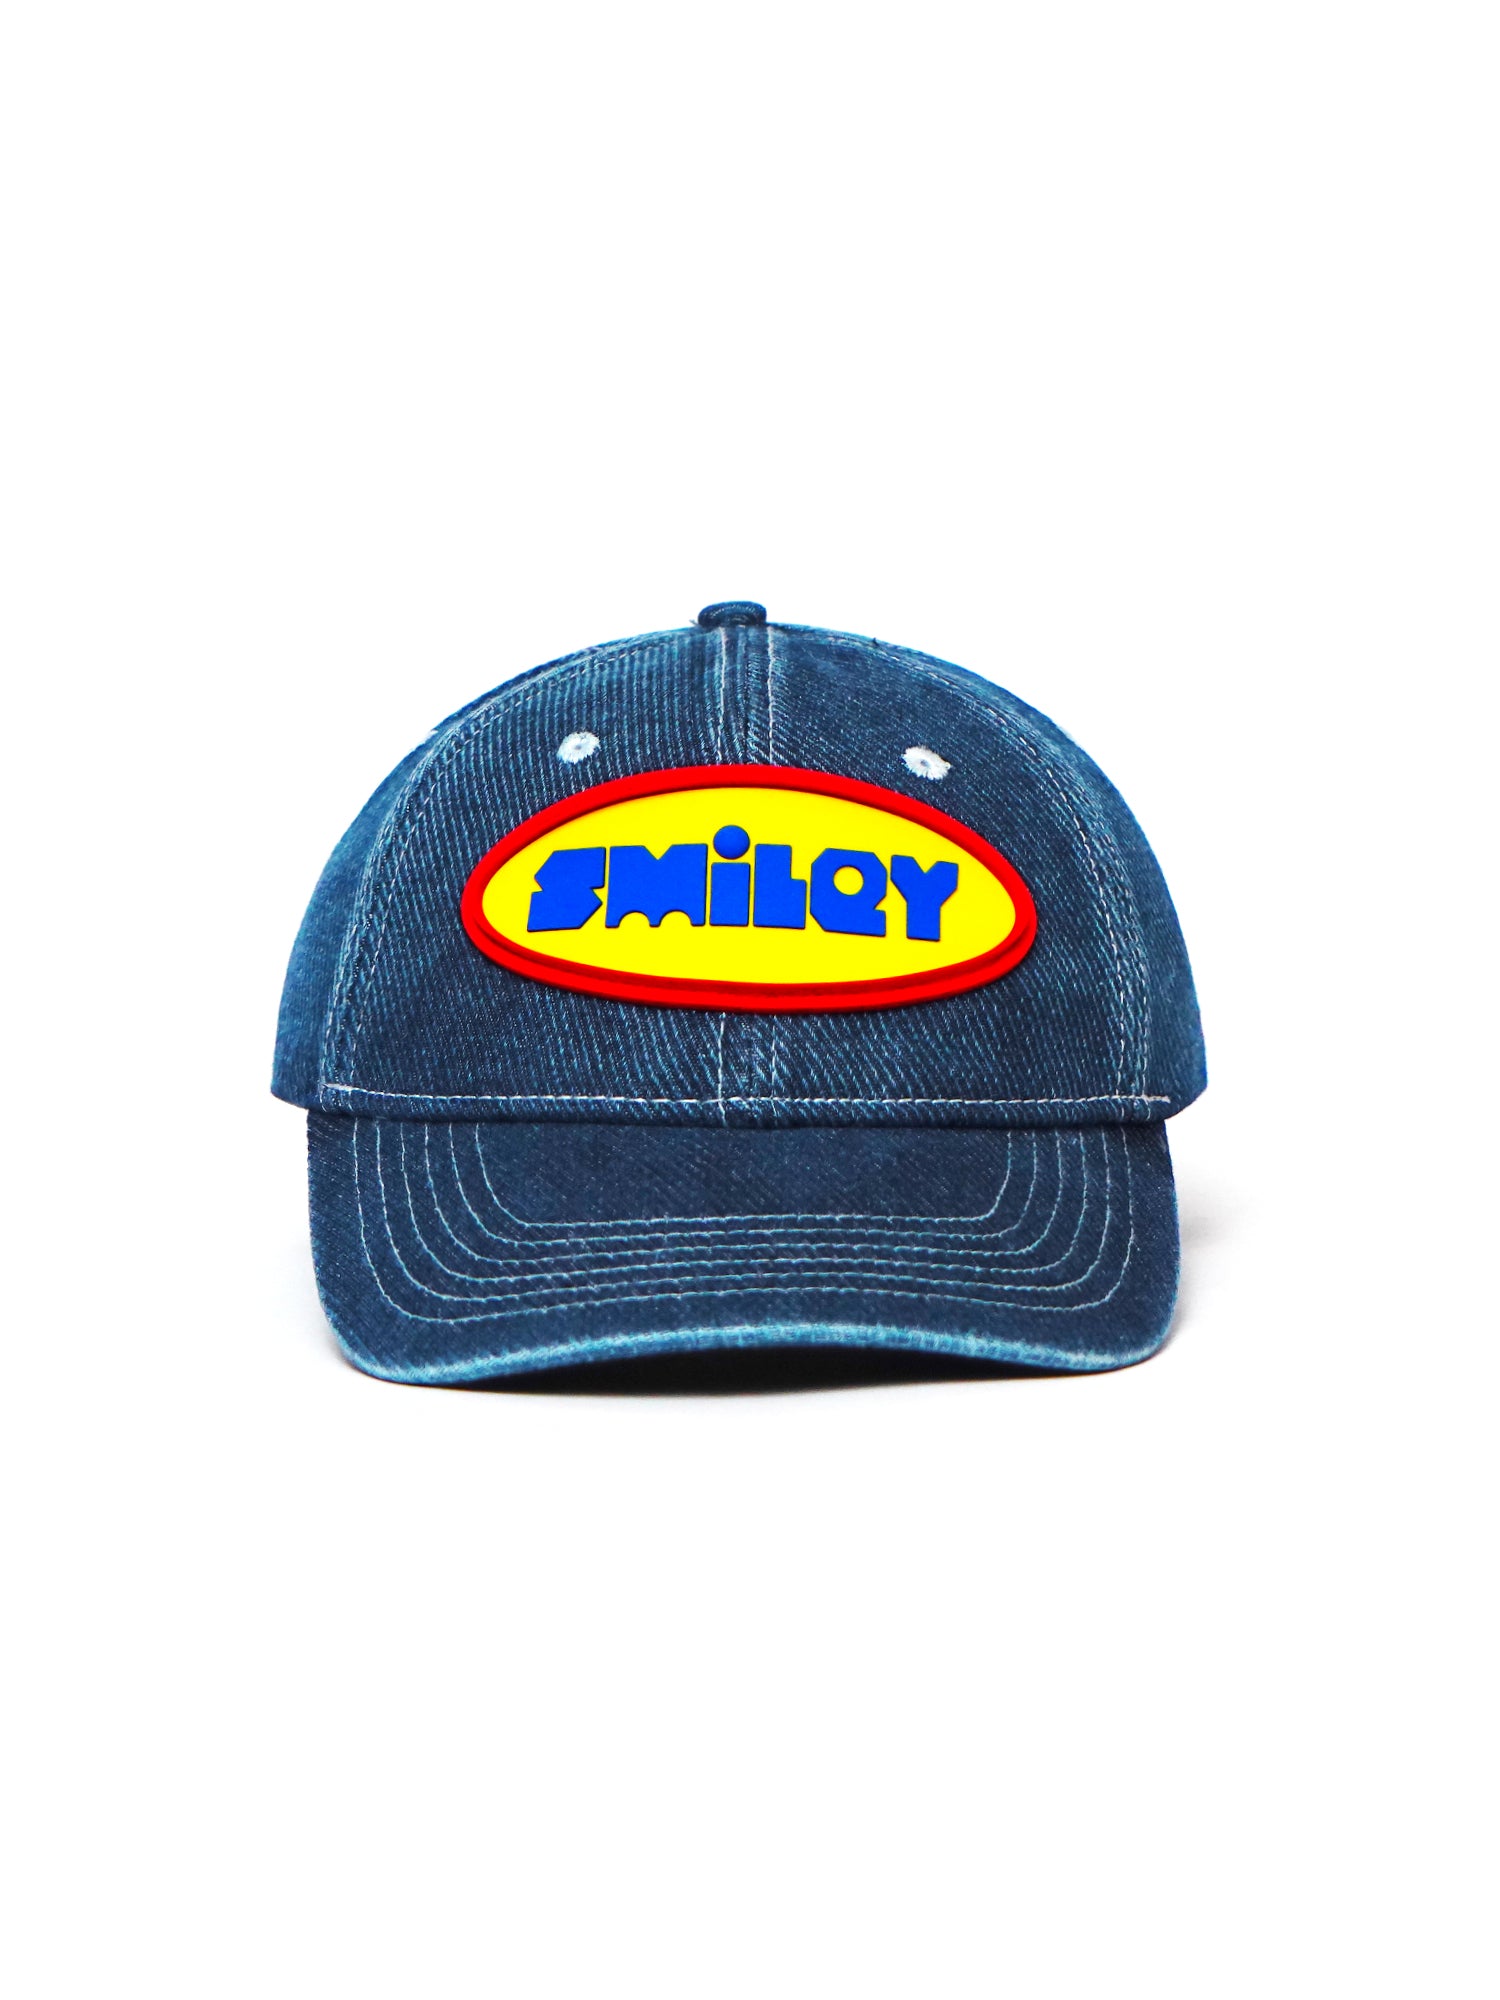 [SMILEY by ANGUS CHIANG] EMBROIDERED DENIM CAP